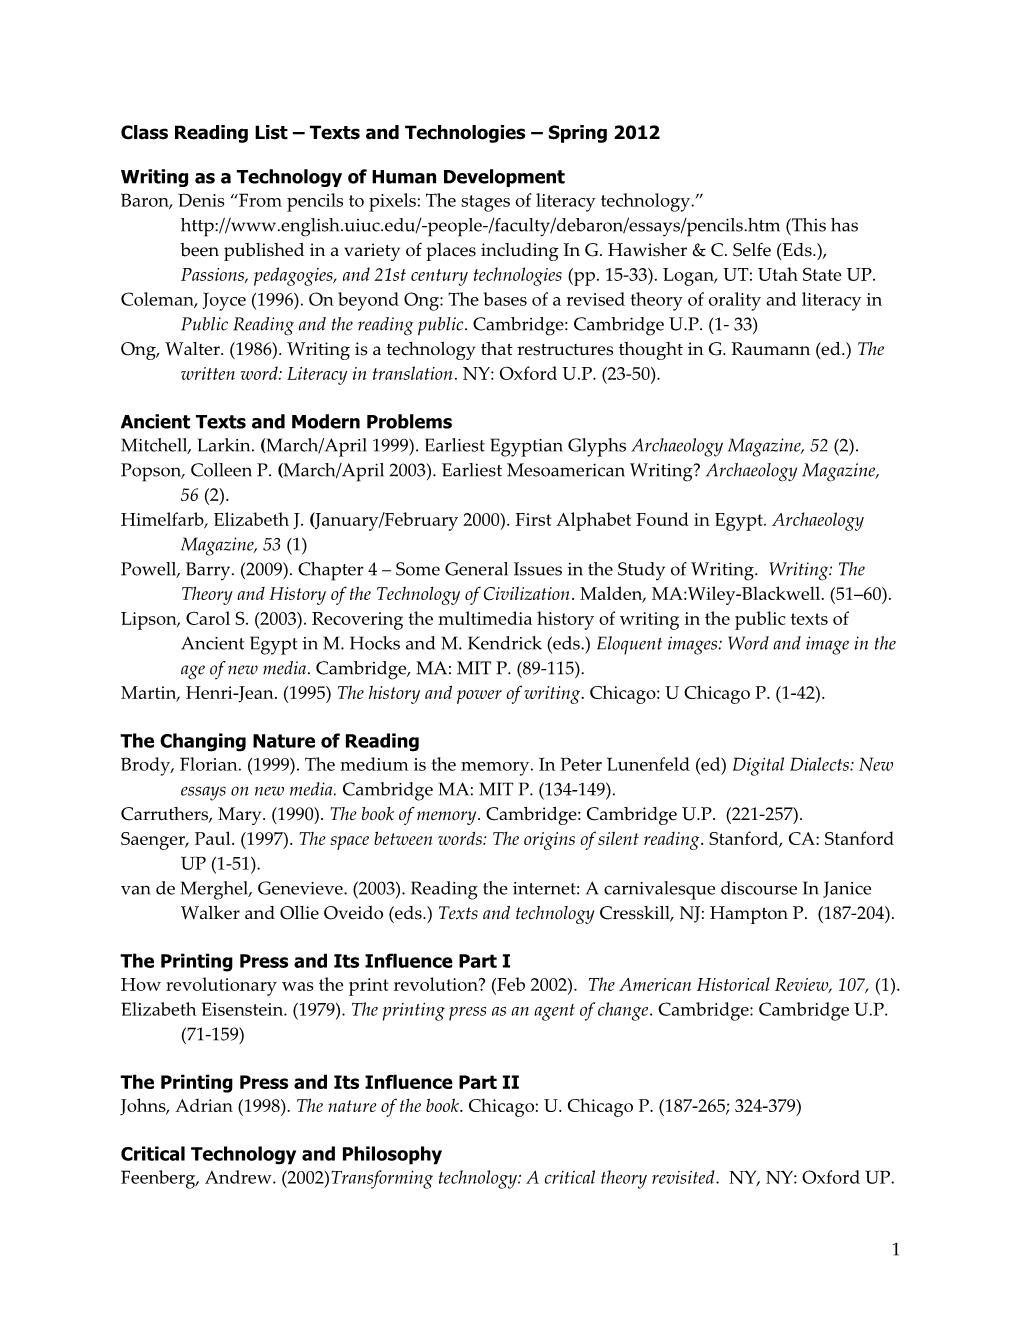 Class Reading List Texts and Technologies Spring 2012